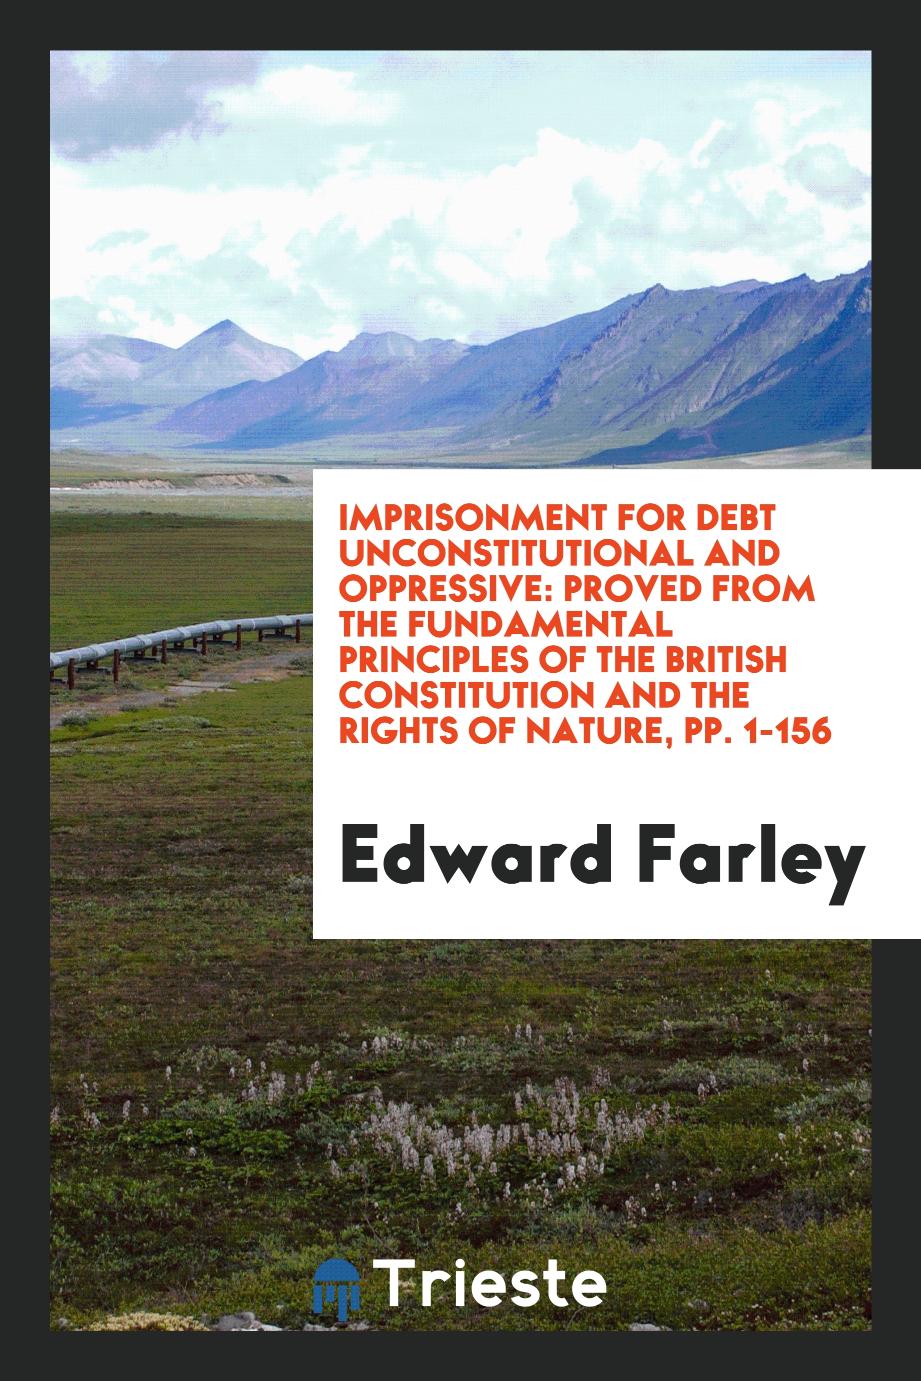 Imprisonment for Debt Unconstitutional and Oppressive: Proved from the Fundamental Principles of the British Constitution and the Rights of Nature, pp. 1-156